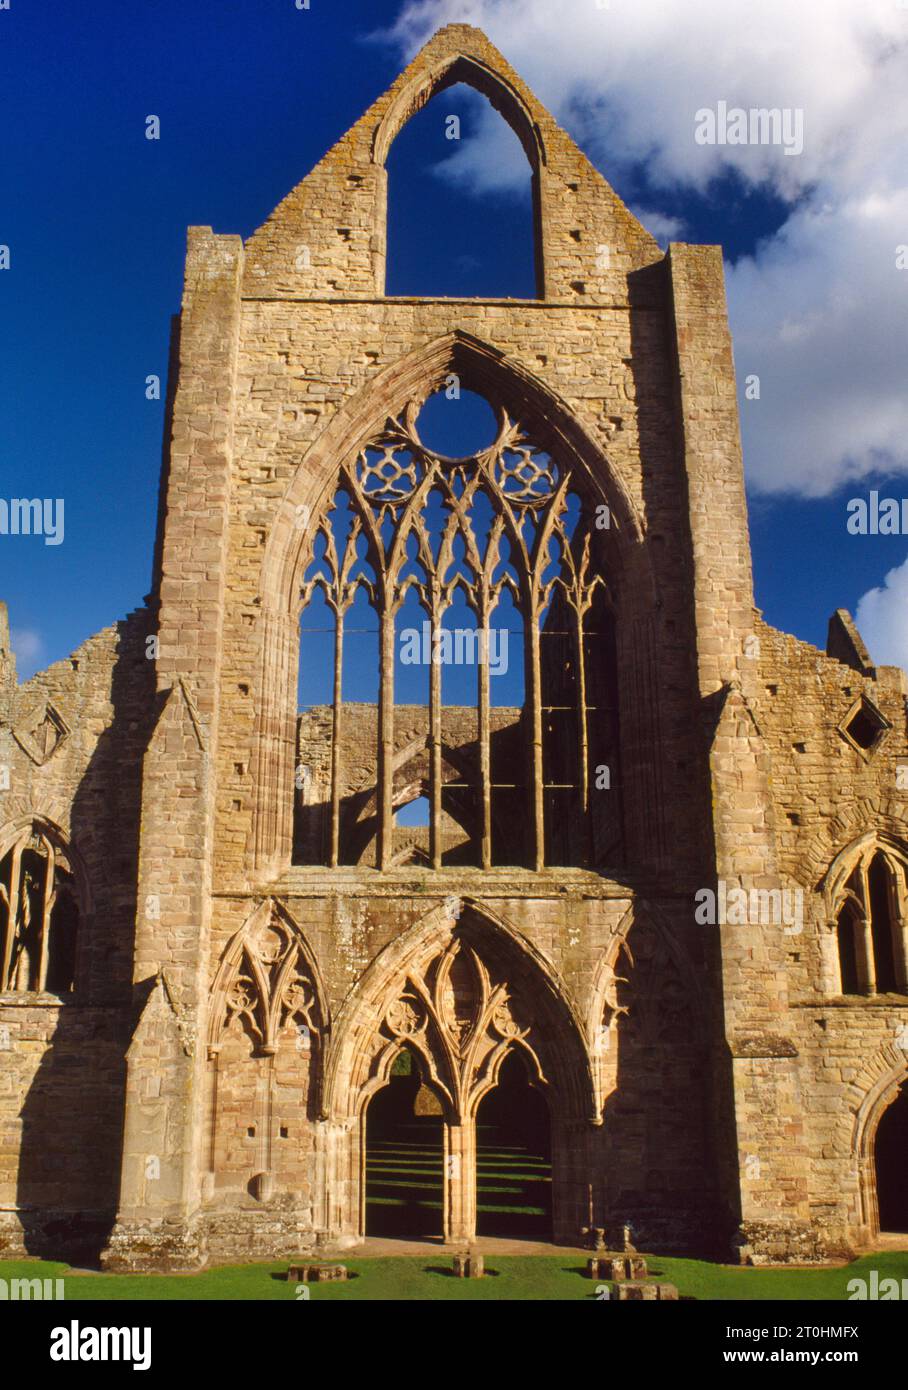 The west front of Tintern Abbey Cistercian monastic church, Monmouthshire, Wales, UK. Founded 1131 by Walter de Clare, the Norman lord of Chepstow. Stock Photo